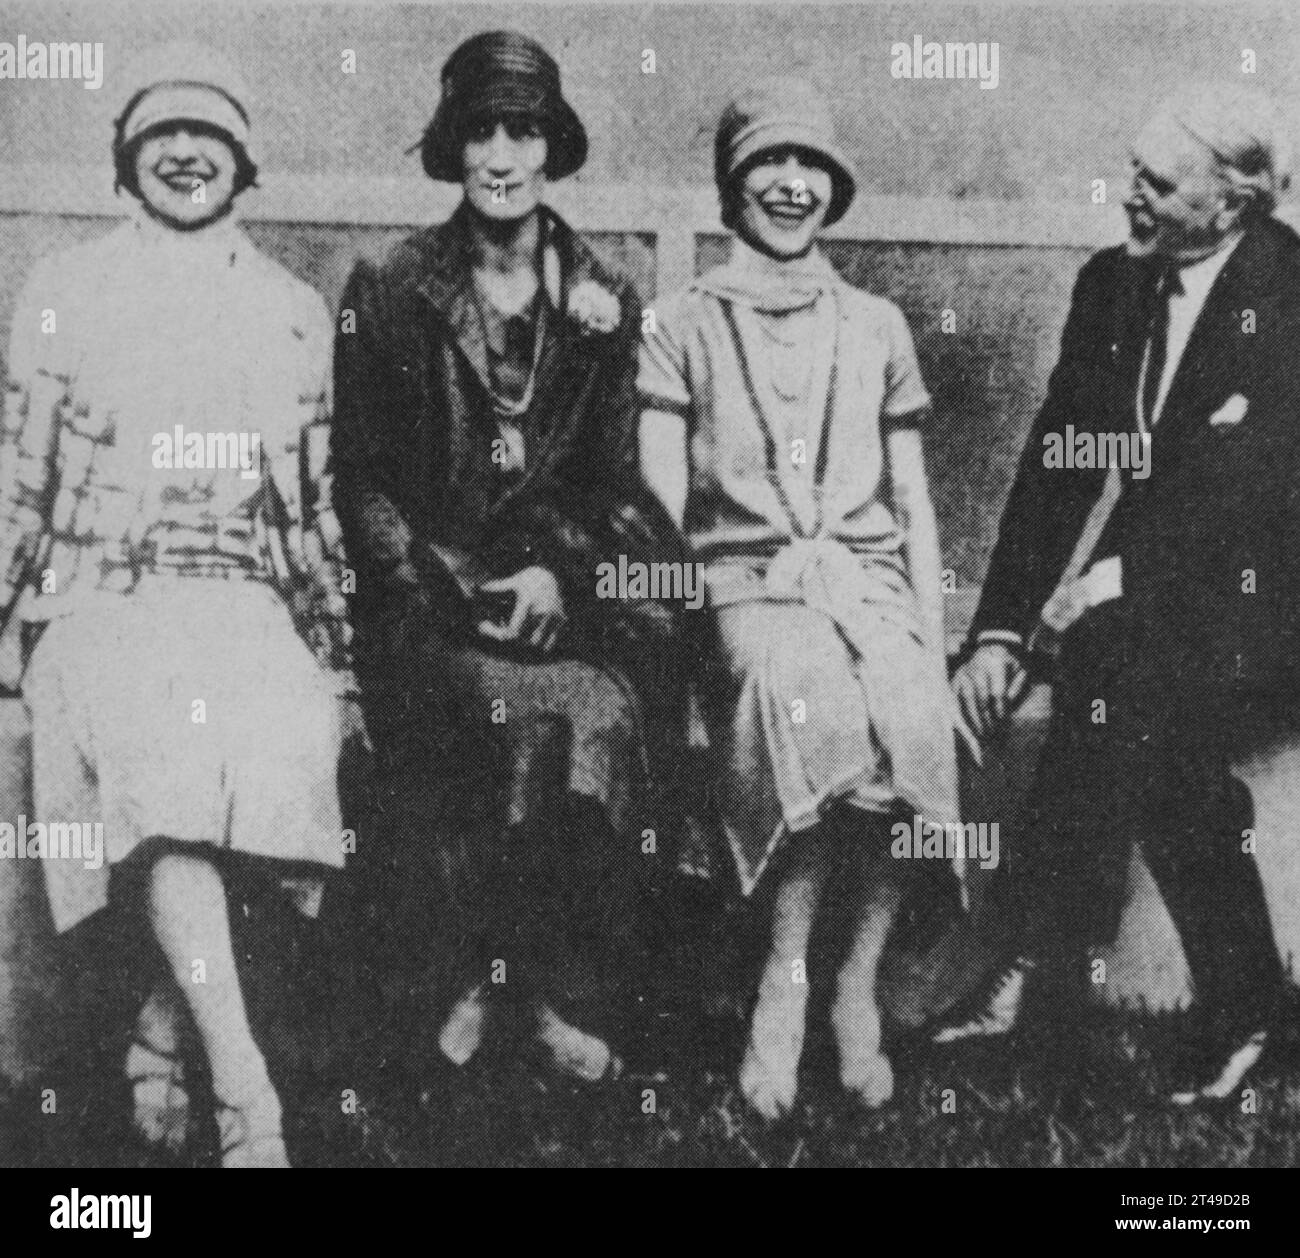 Gordon Selfridge, one of the most respected and wealthy retail magnates in the United Kingdom sitting with American stars 'The Dolly sisters'. Stock Photo